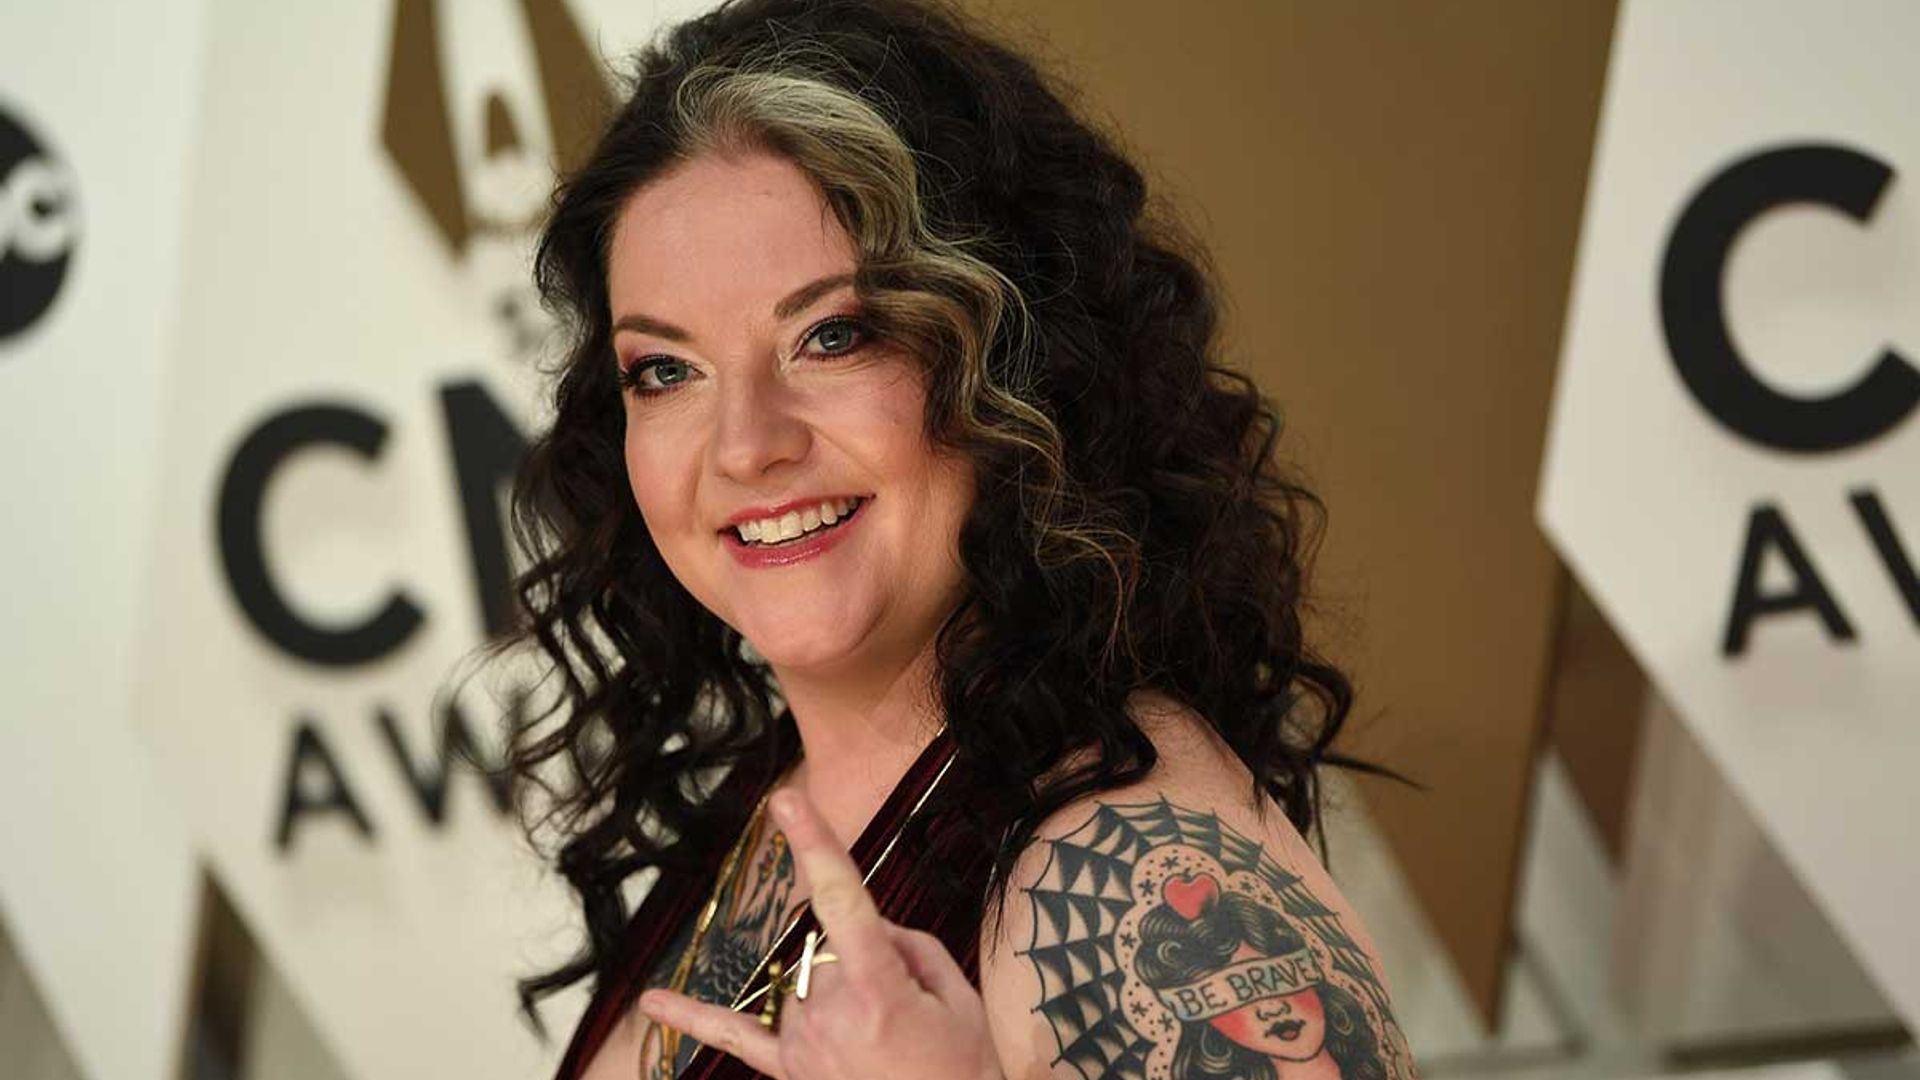 Exclusive: Ashley McBryde reveals the one thing she’s not allowed to do at 2022 CMA Awards